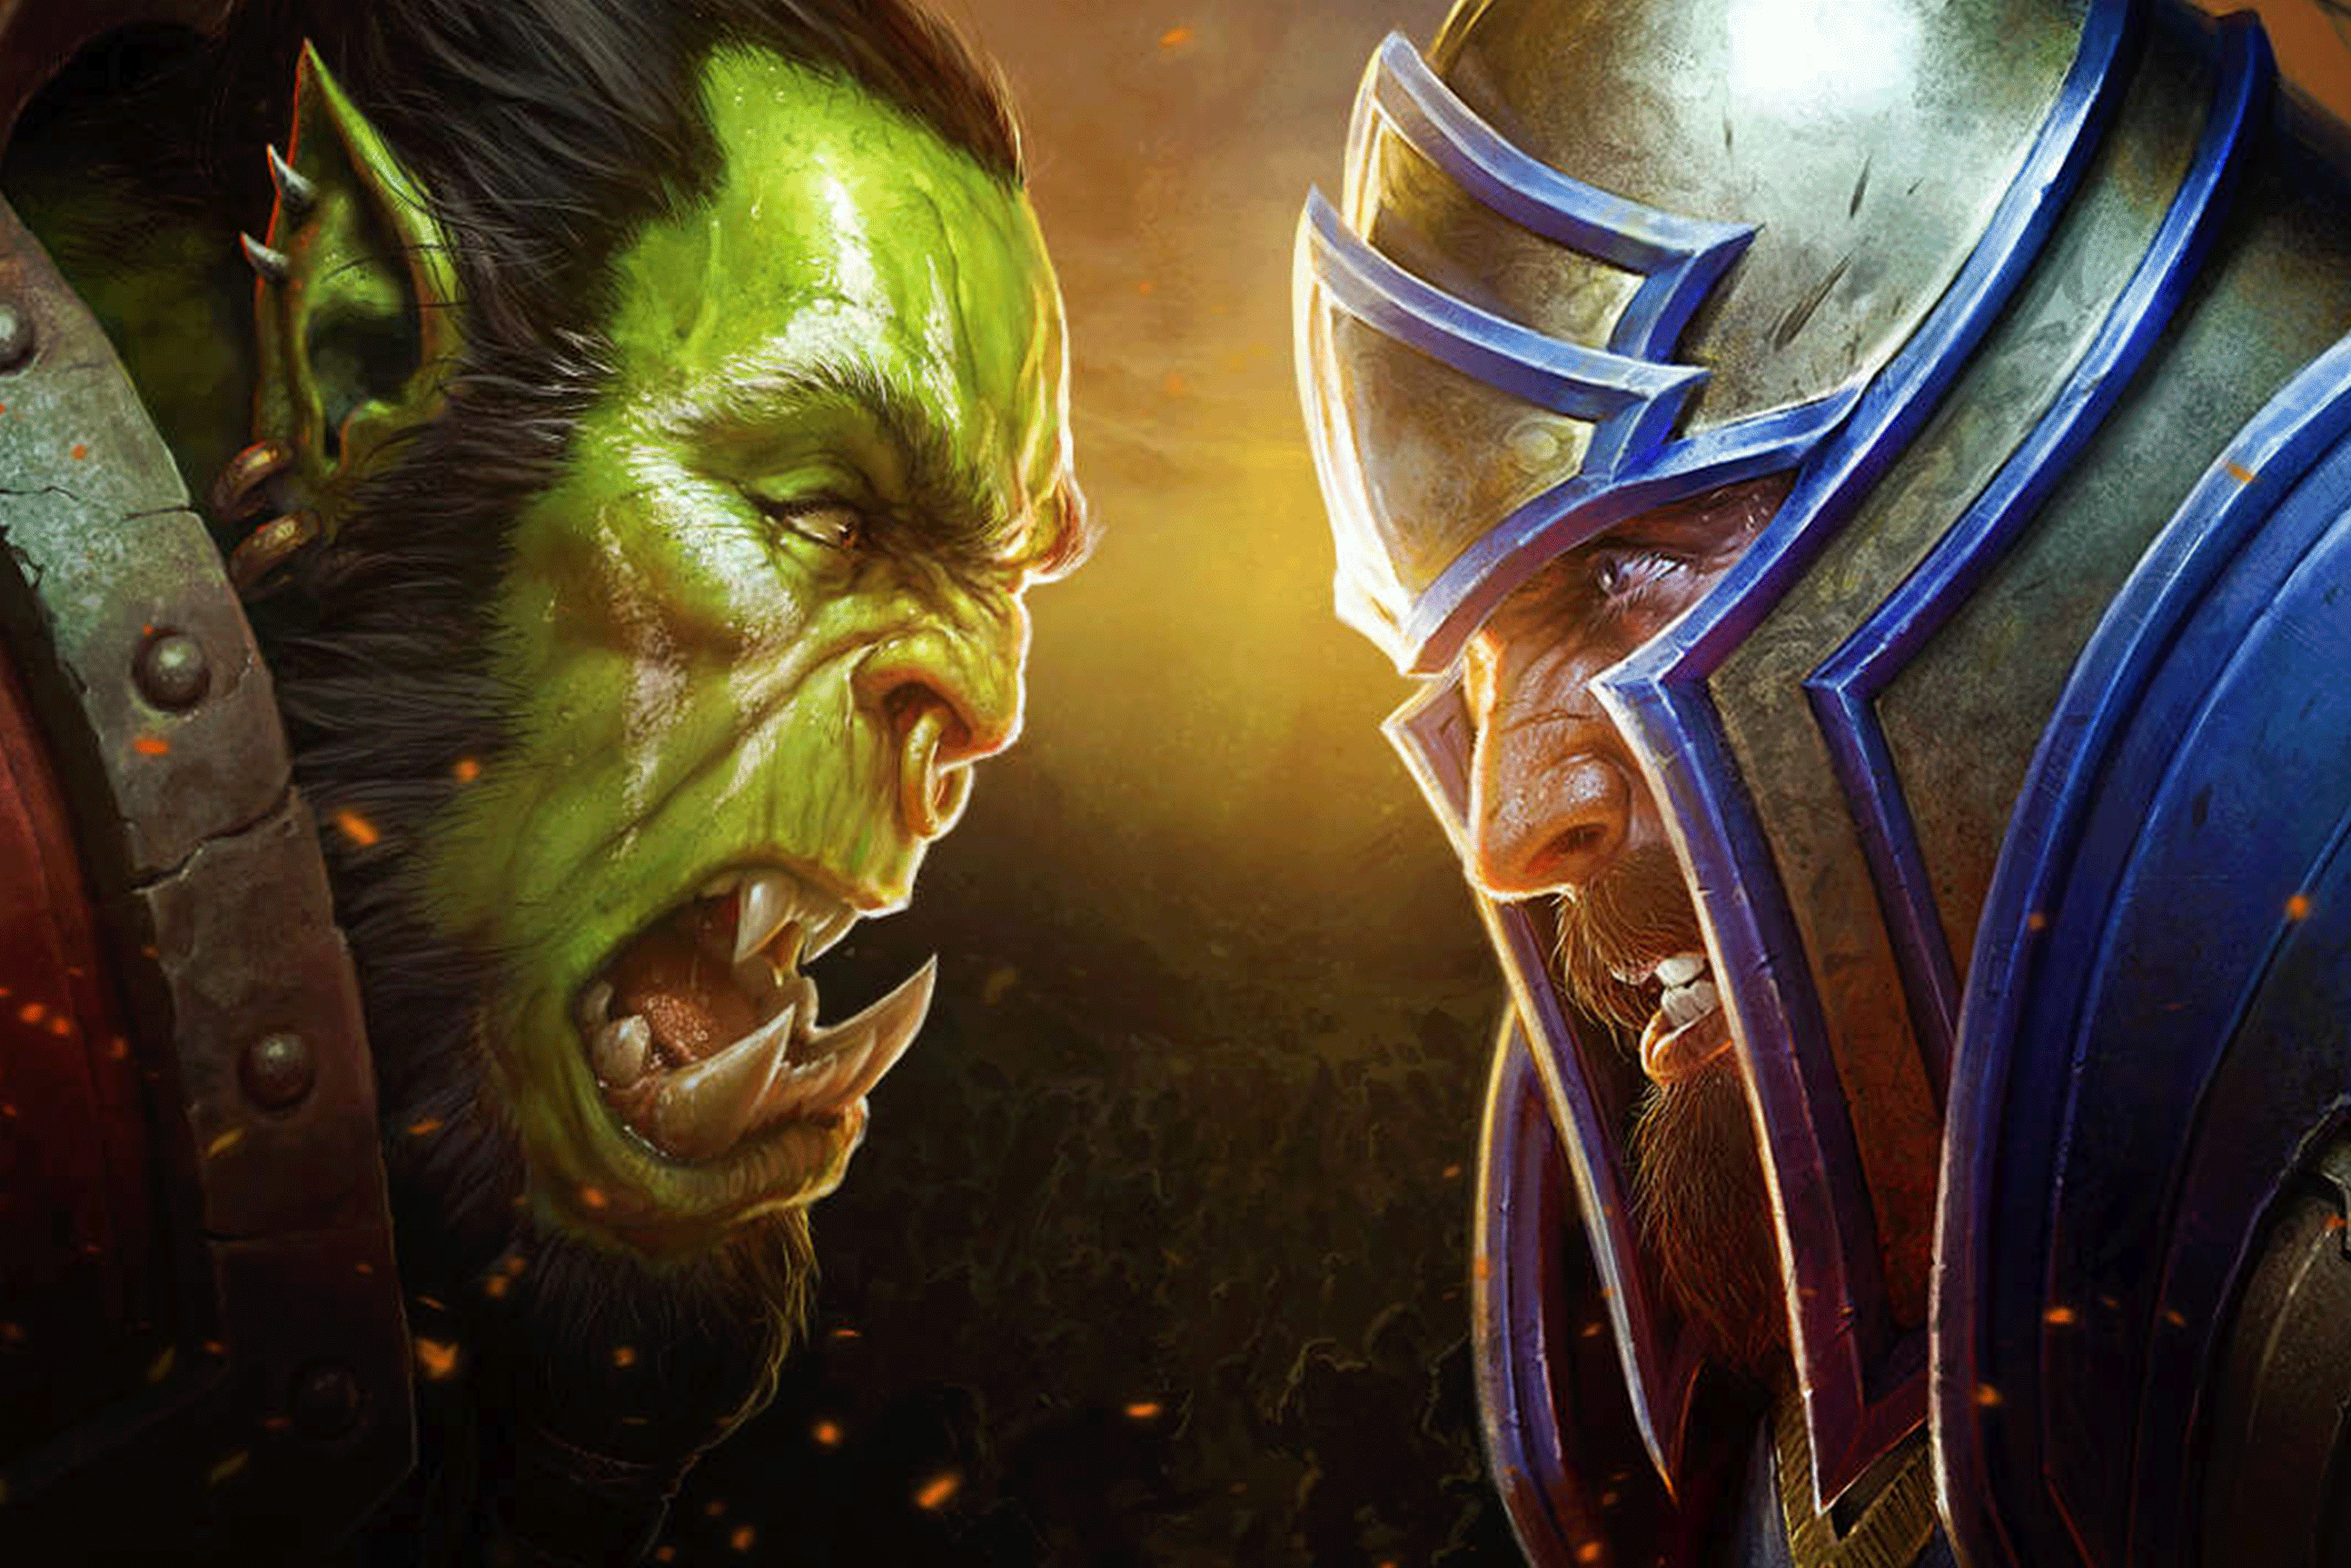 warcraft orcs and humans gog poster